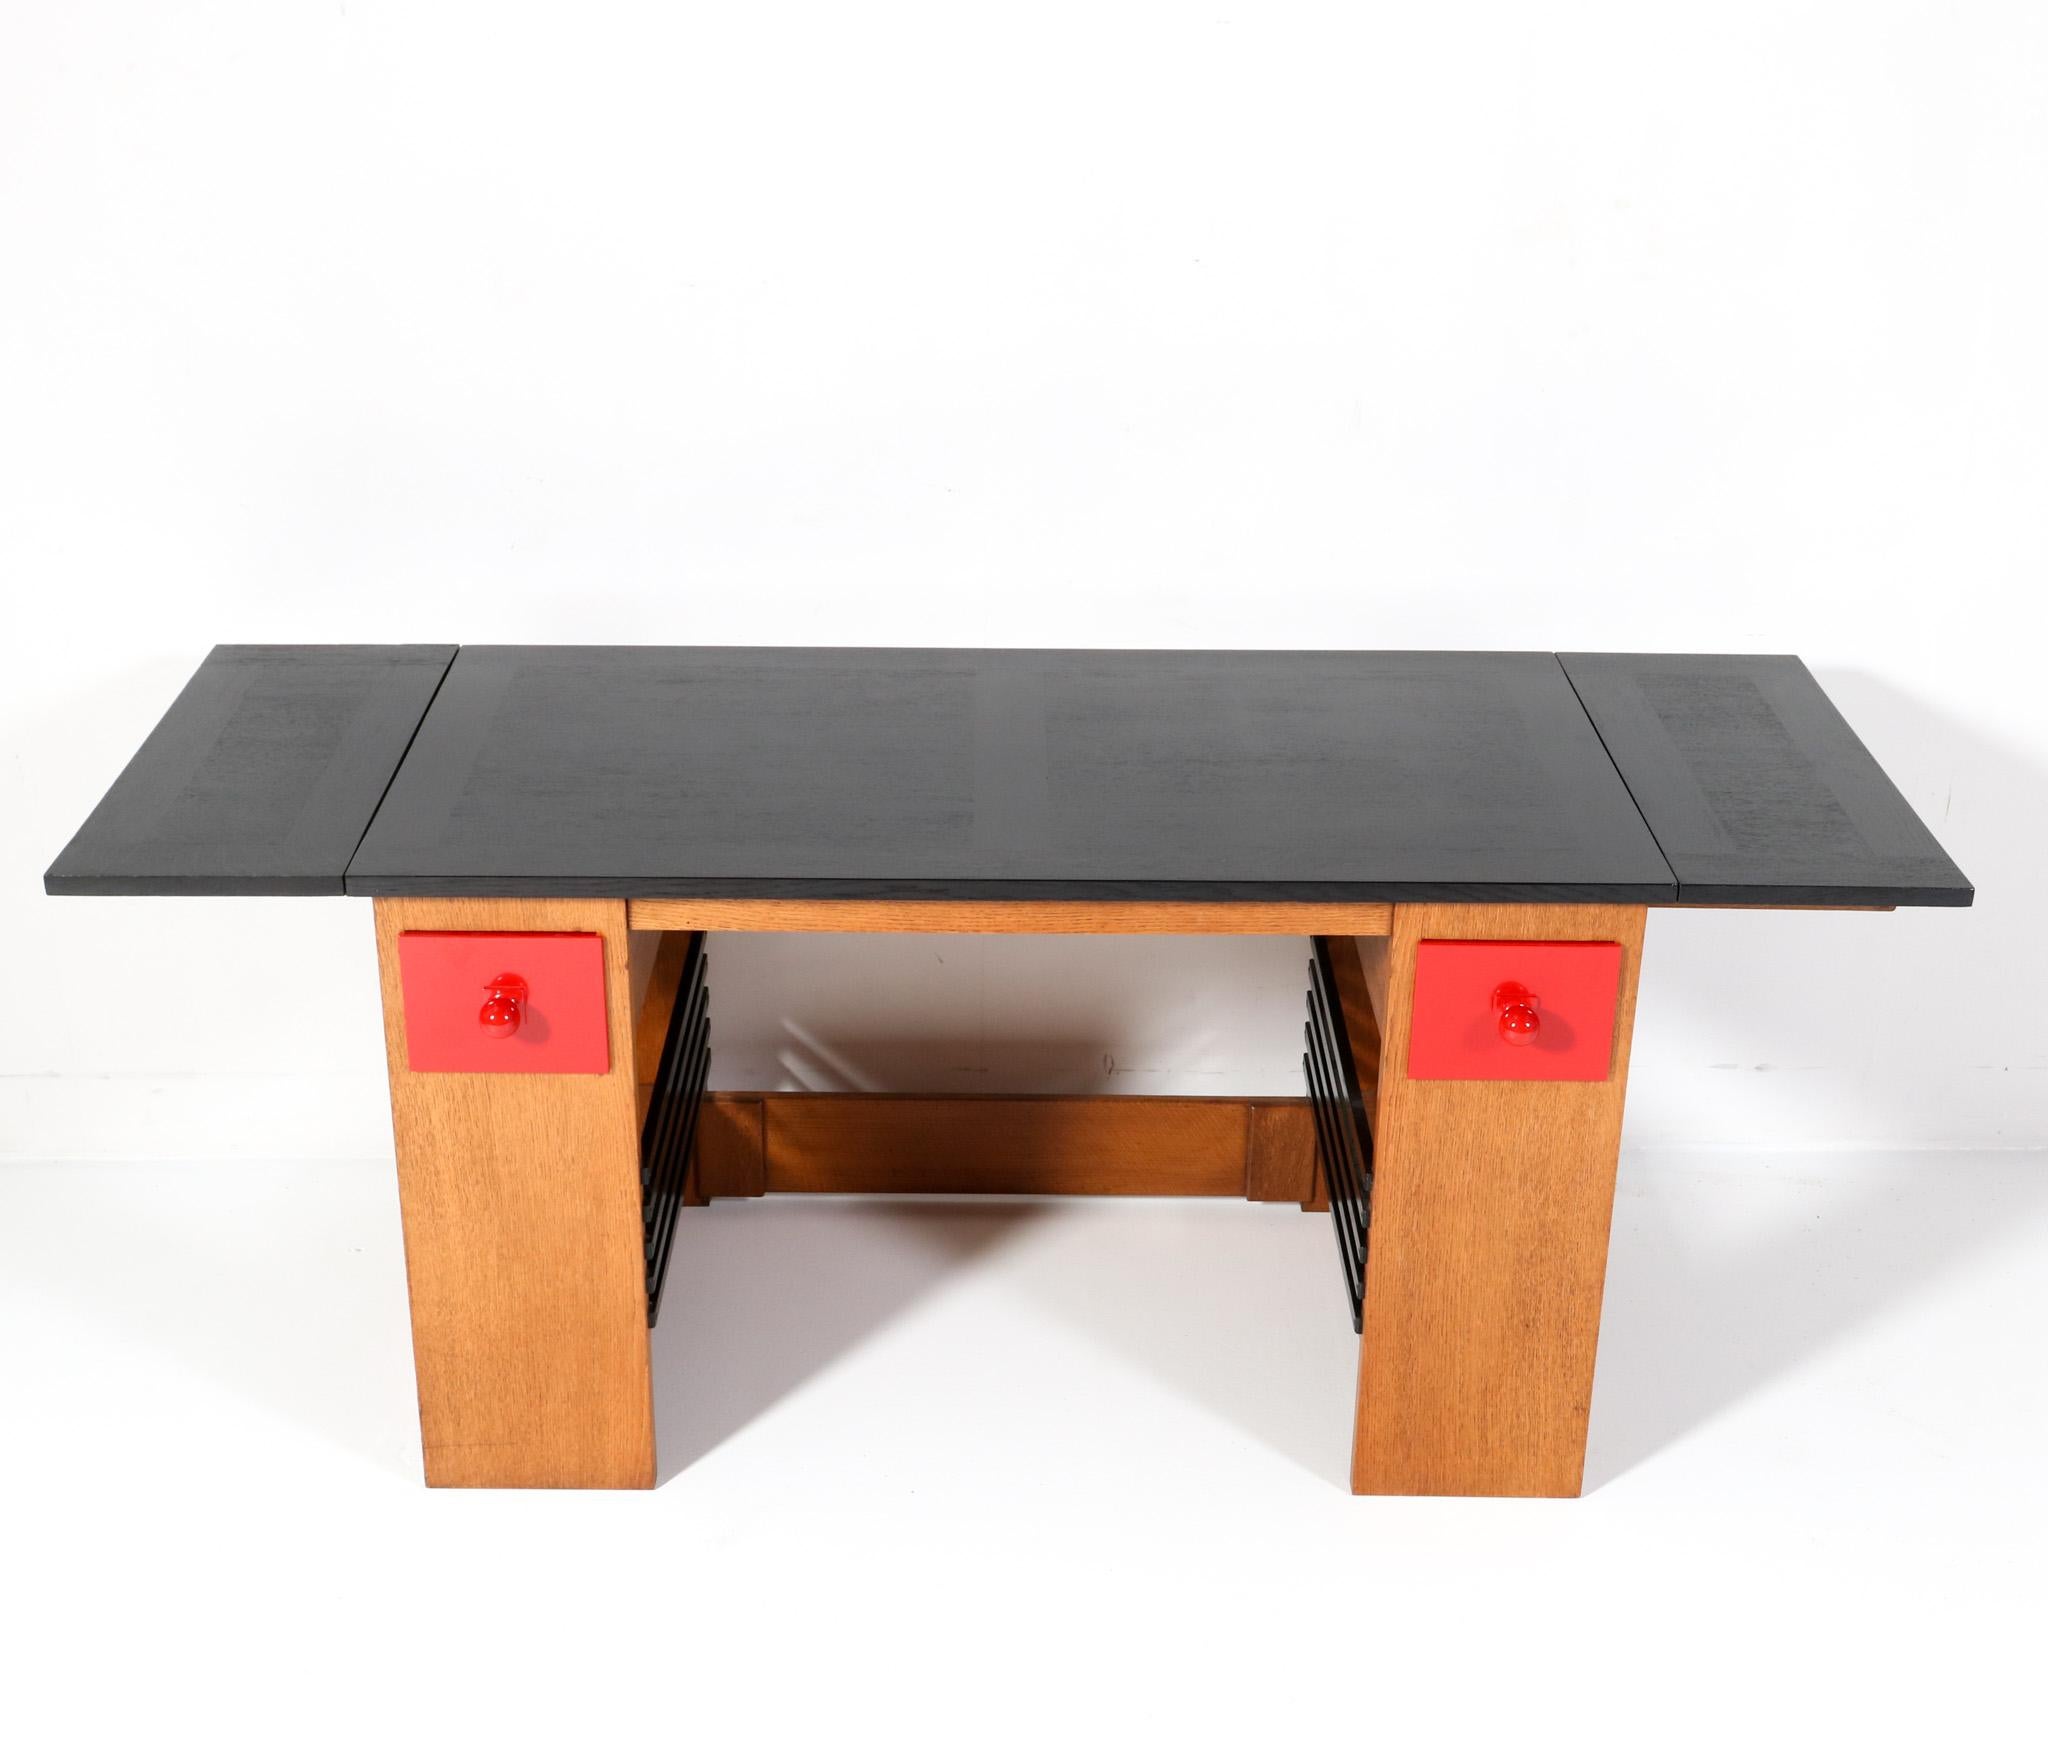 Oak Art Deco Modernist Desk or Writing Table by Hendrik Wouda for Pander, 1920s For Sale 2